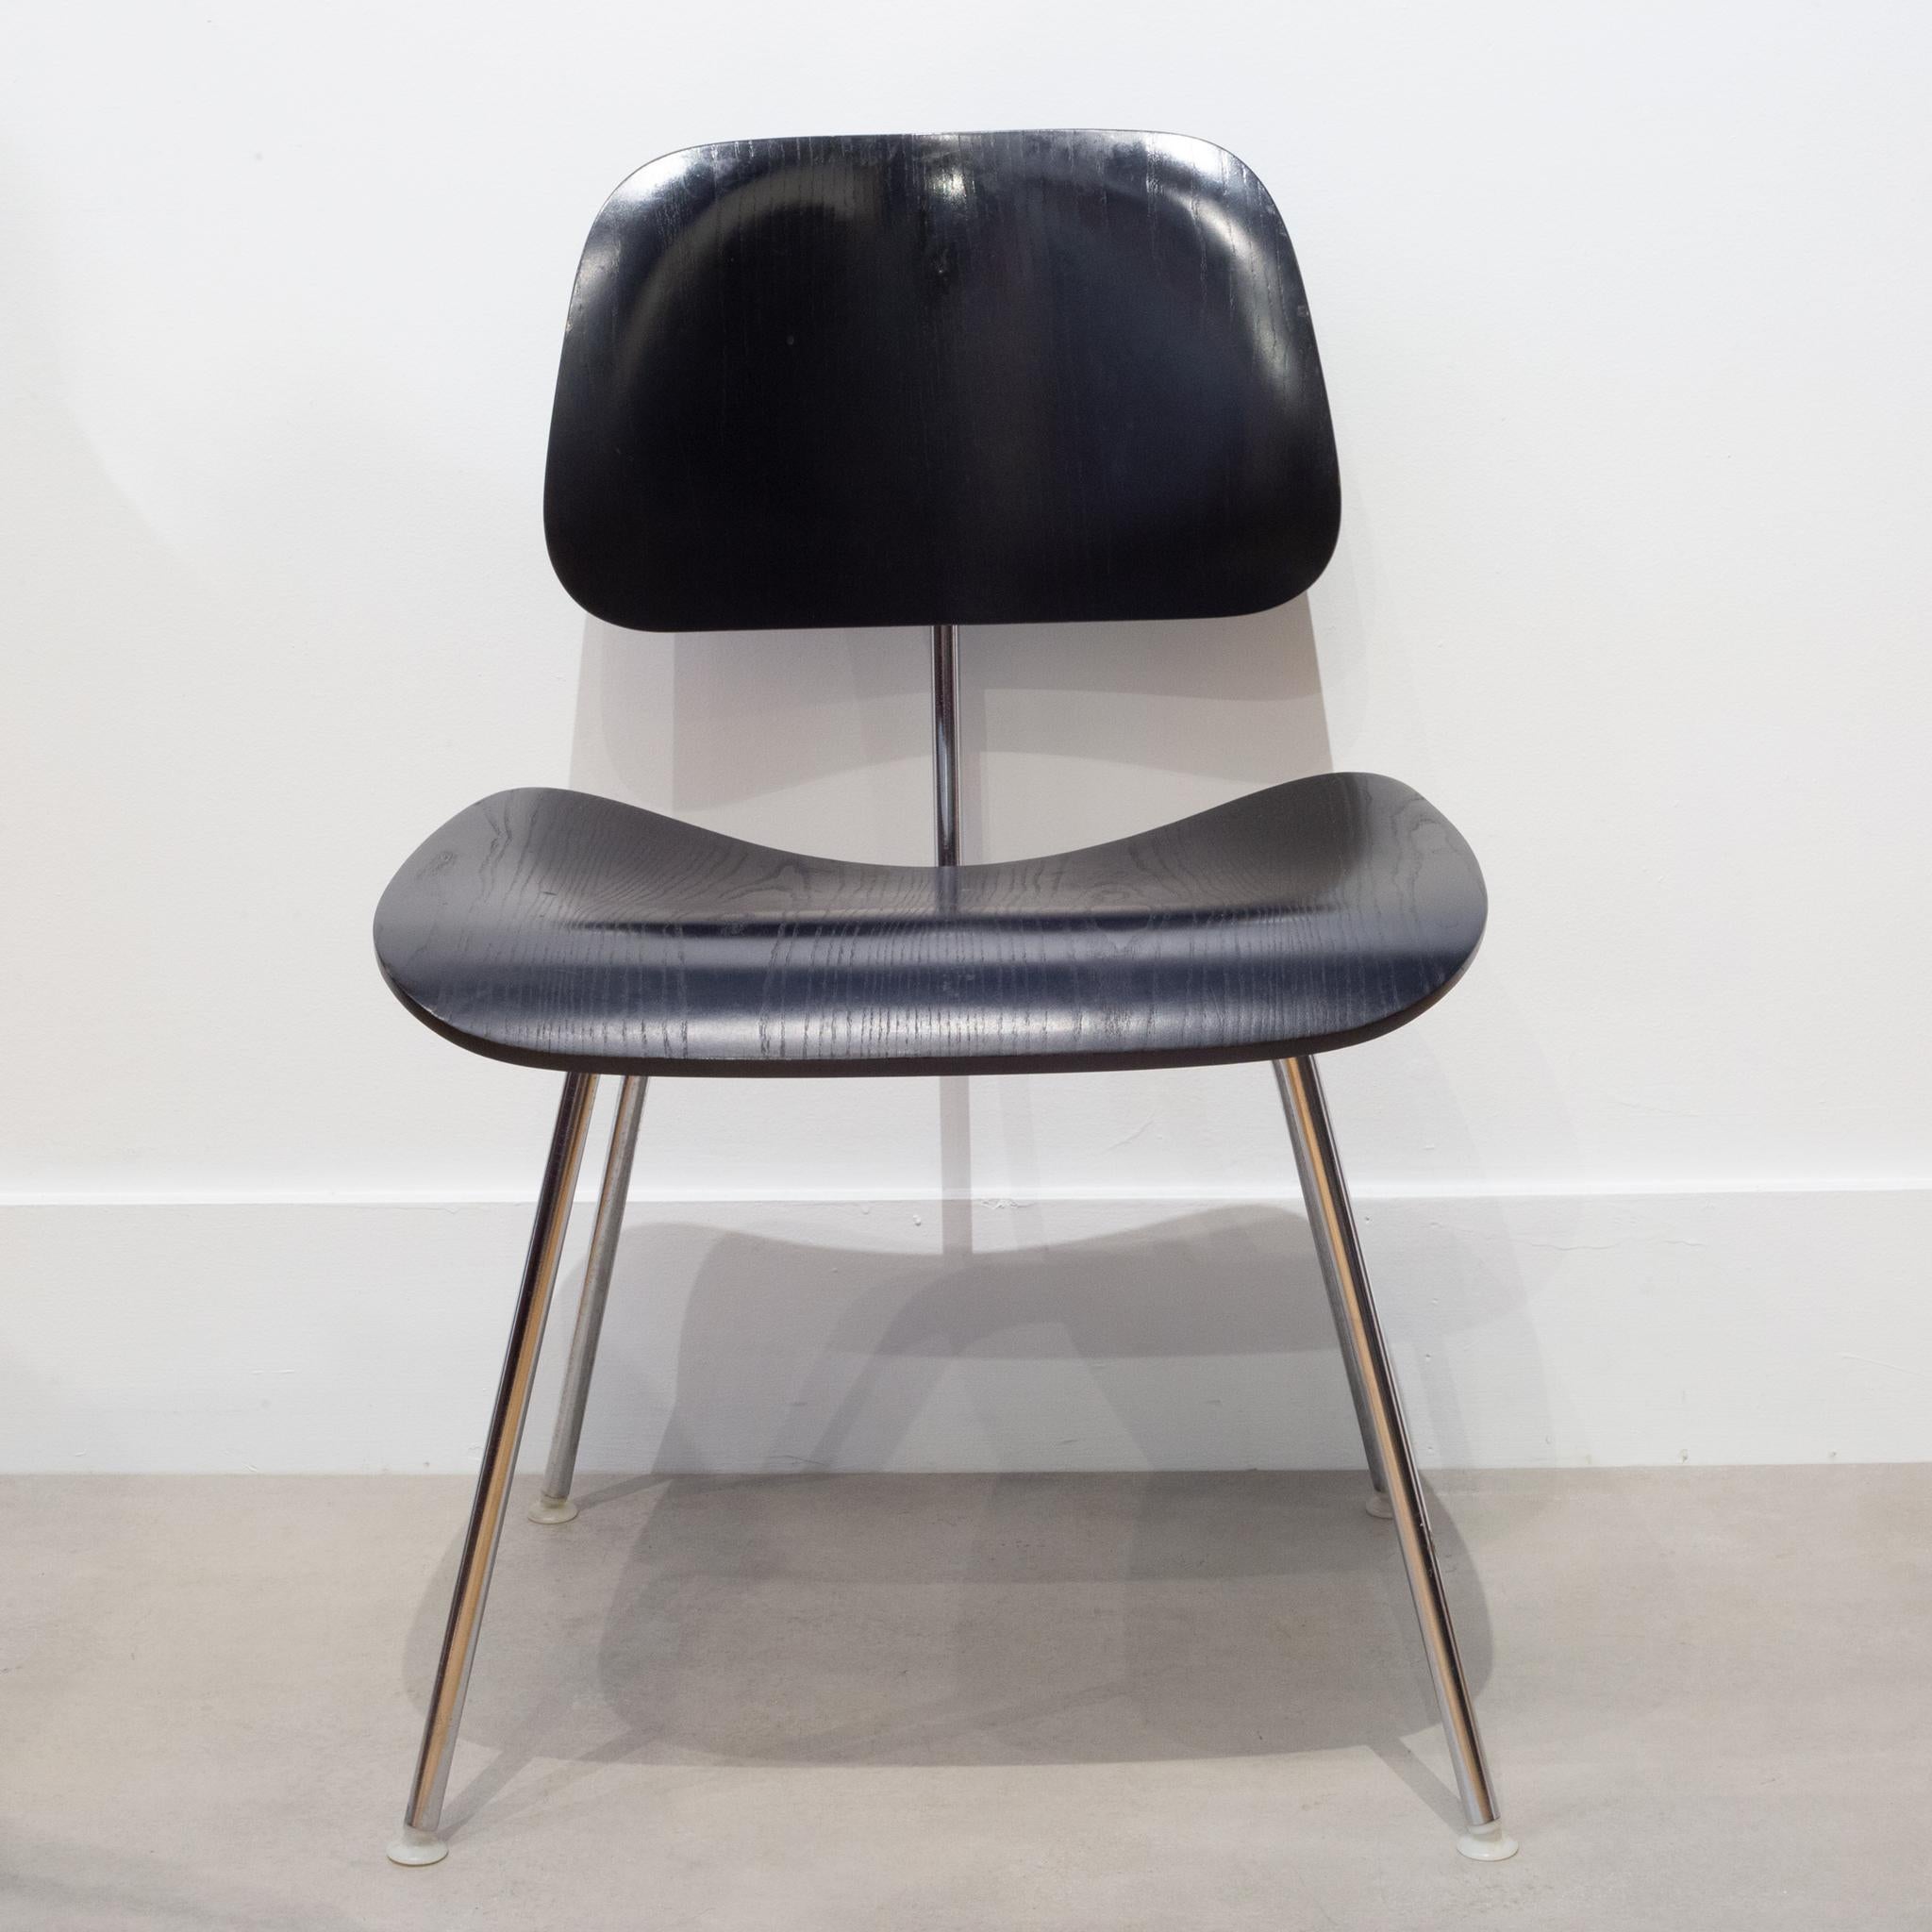 About

Price is per chair. 

An early production pair of ebonized Eames LCM (lounge chair metal) with original finish and original Herman Miller/Charles Eames foil label. The original screw-on glides are on each foot. Minor wear and slight